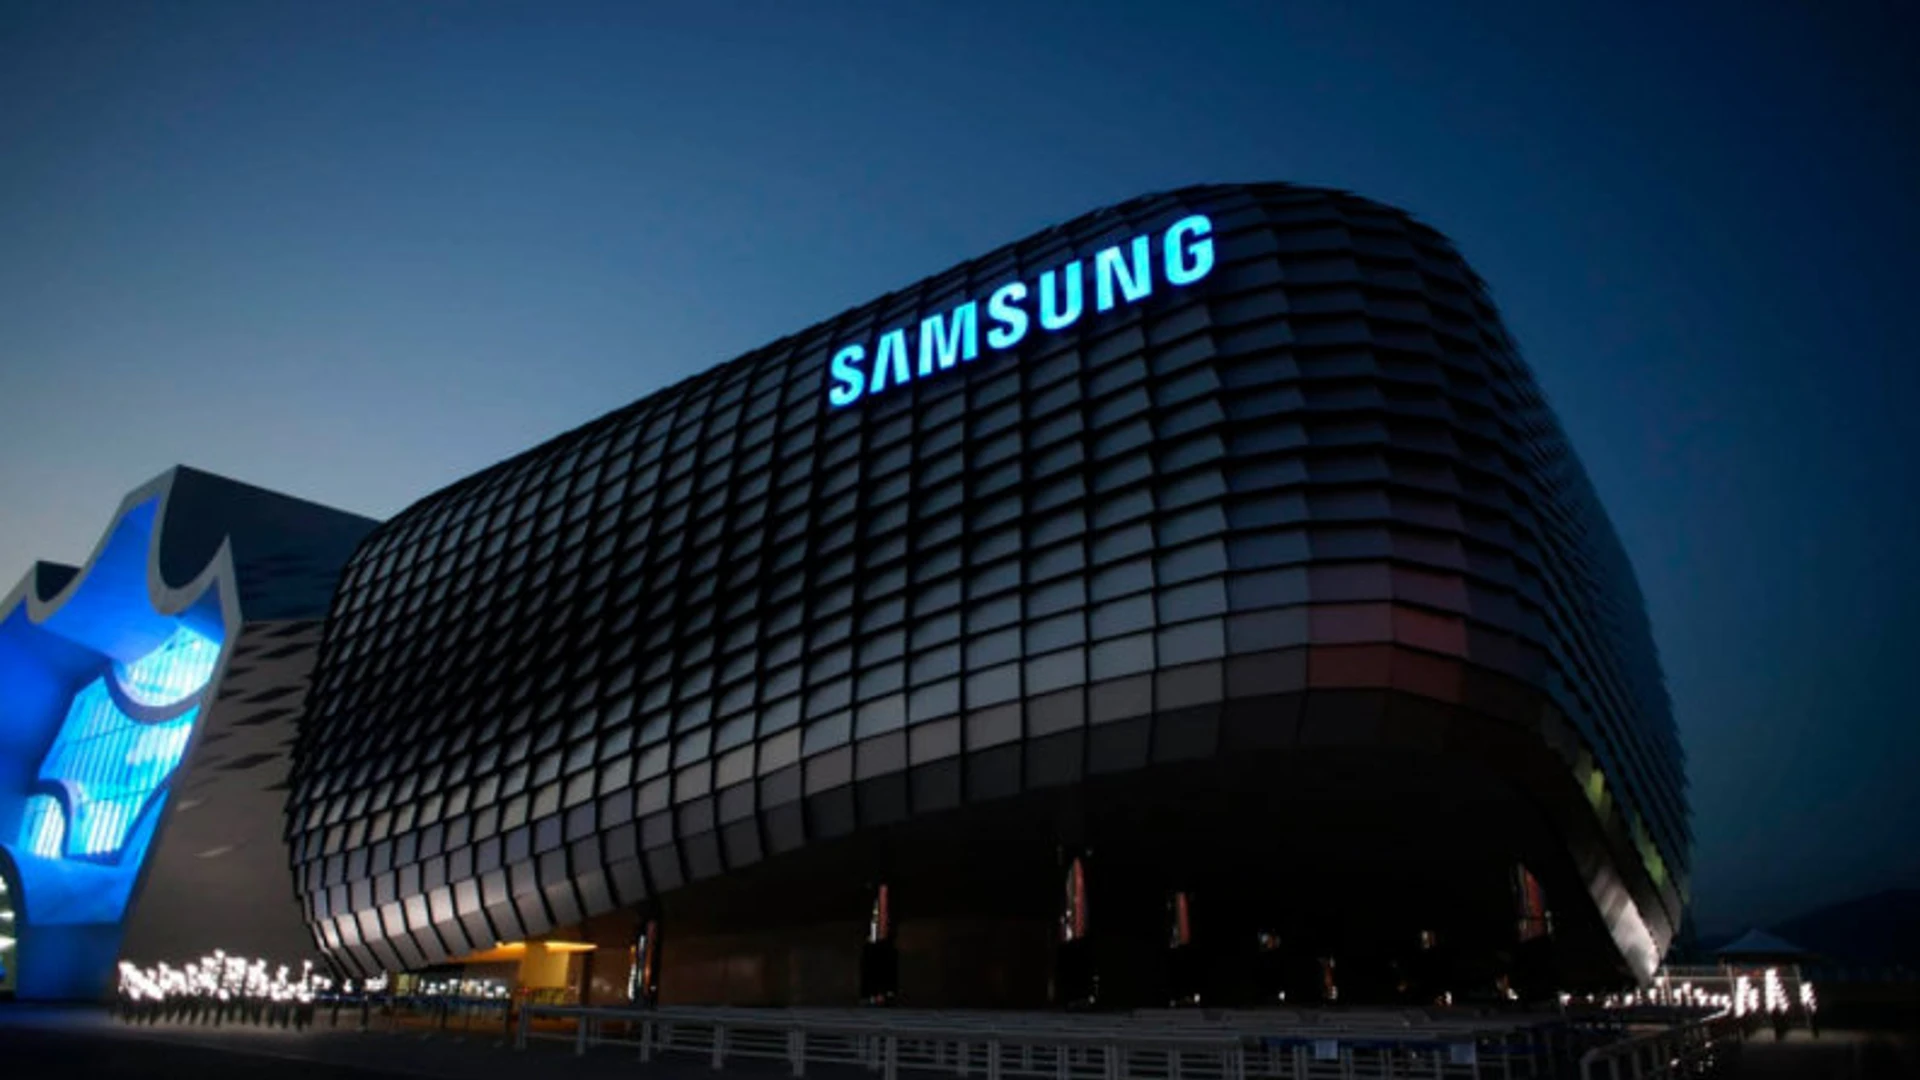 Samsung Hacked! Private Data Of ‘Some’ U.S. Customers Compromised, Samsung Admits